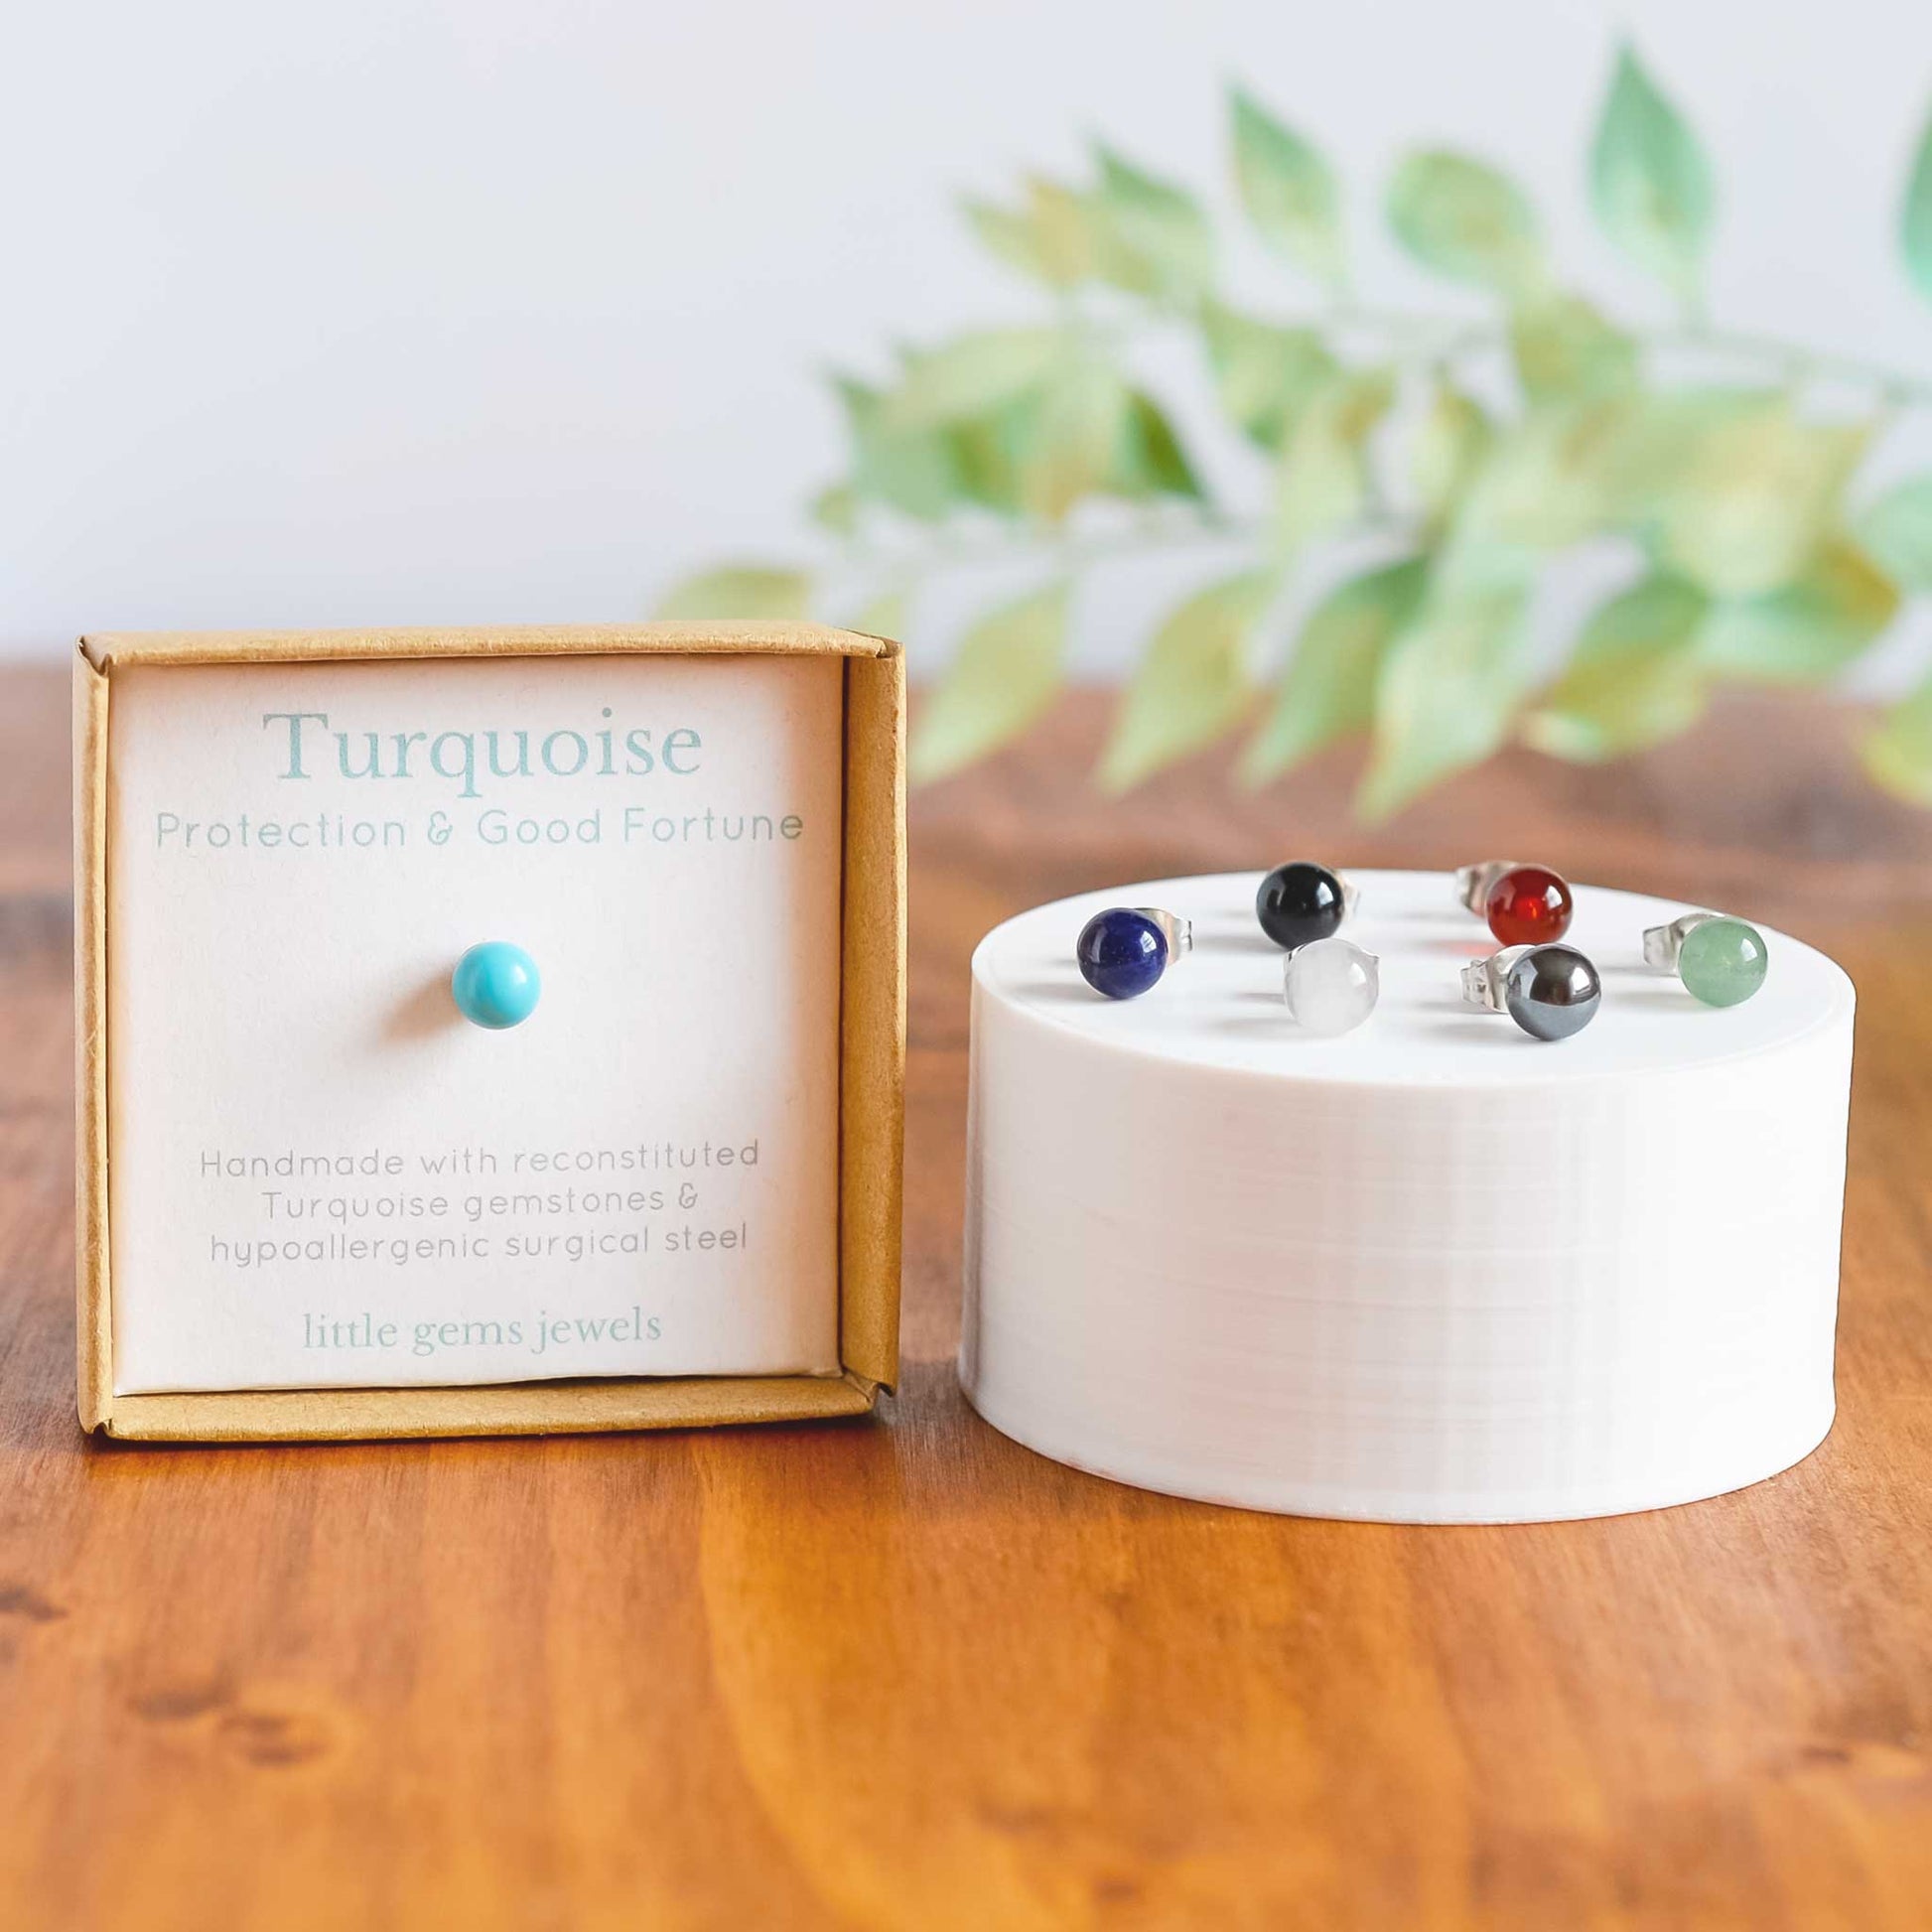 Turquoise single stud in gift box next to six other gemstone studs on white display plinth.